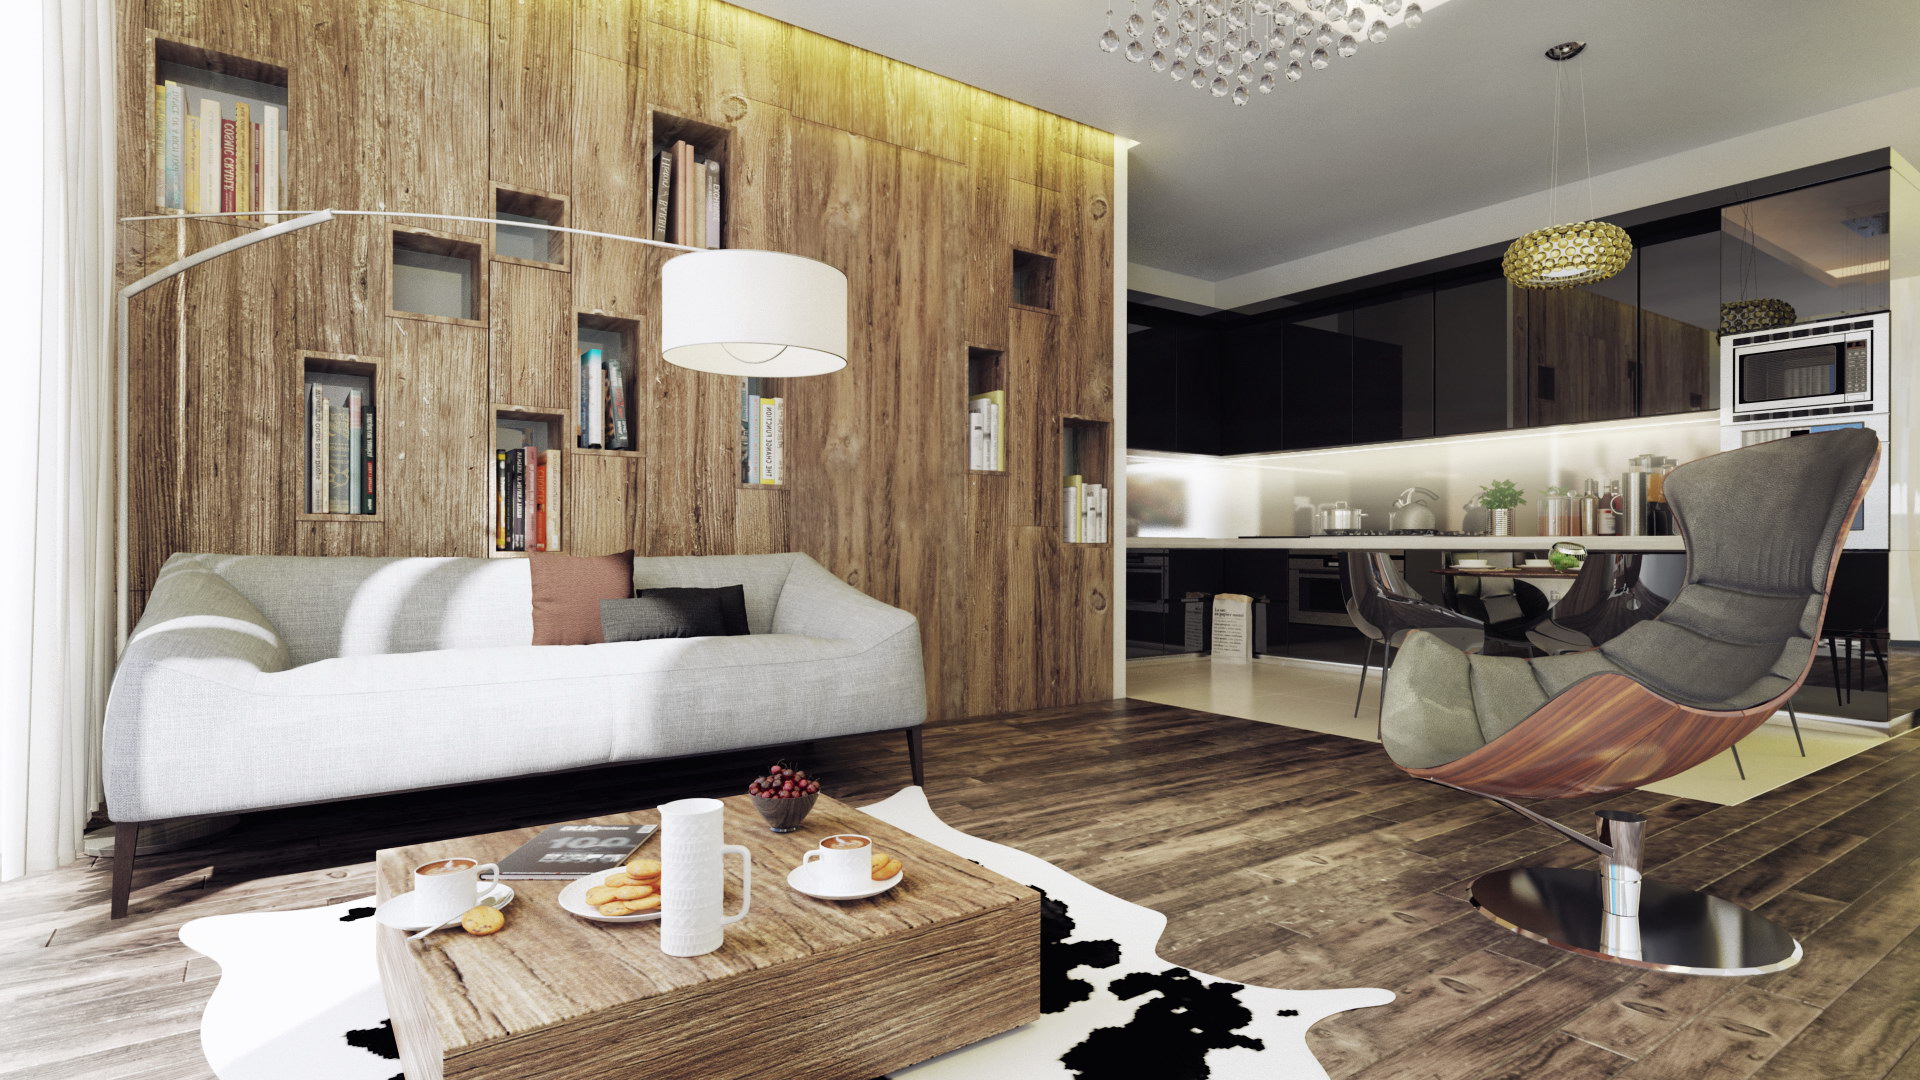 A luxurious living room with wooden walls and a cowhide rug.